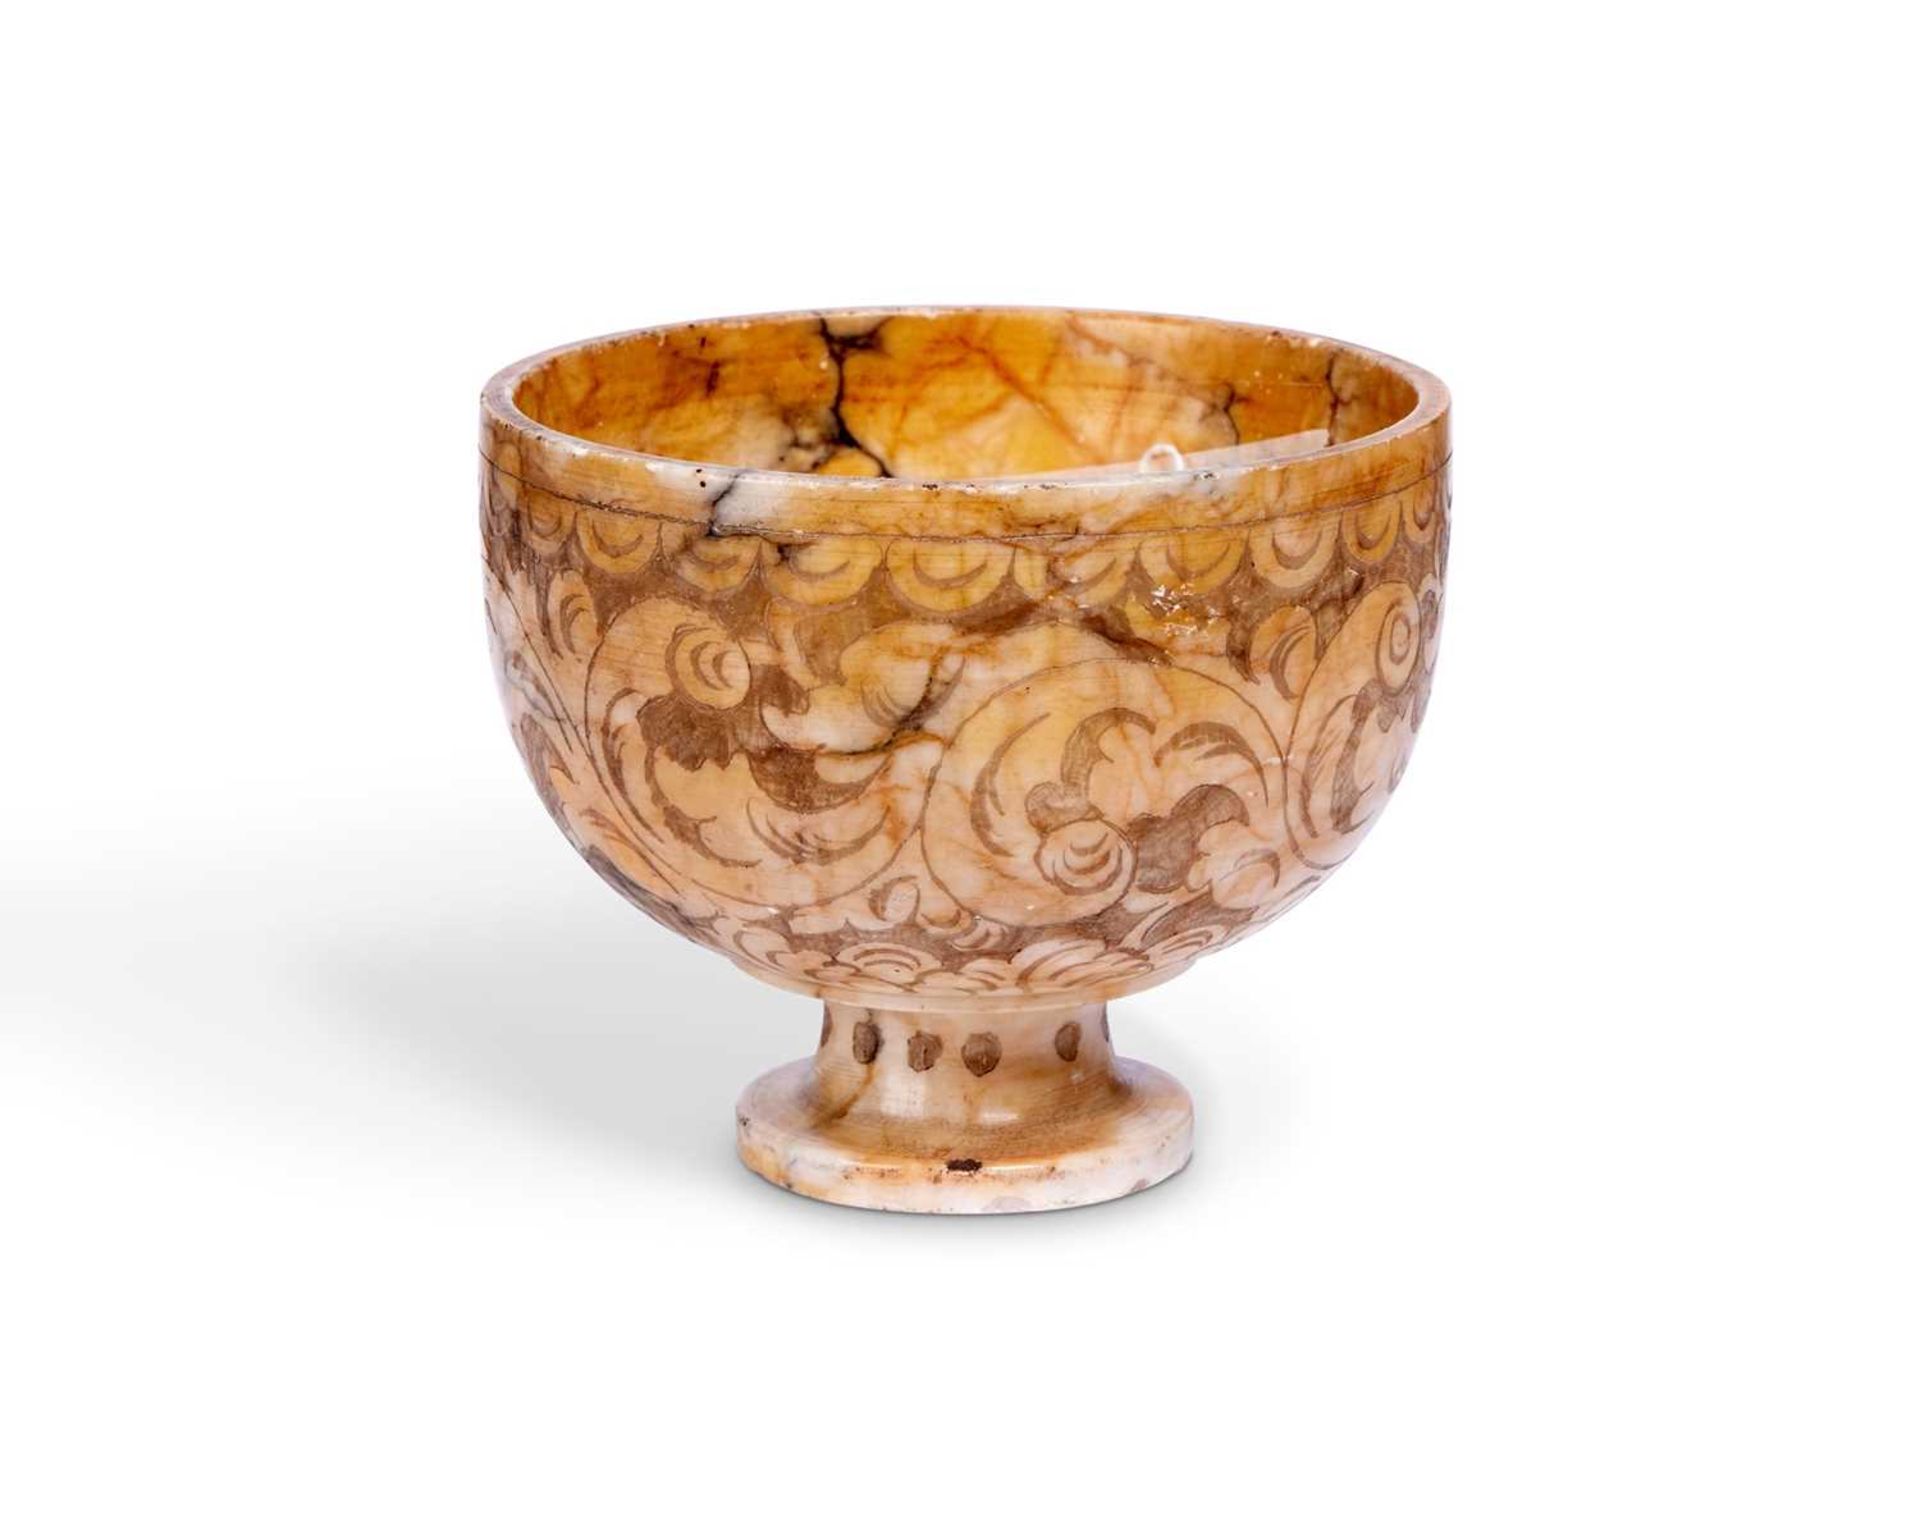 AN 18TH / 19TH CENTURY ITALIAN CARVED ALABASTER BOWL